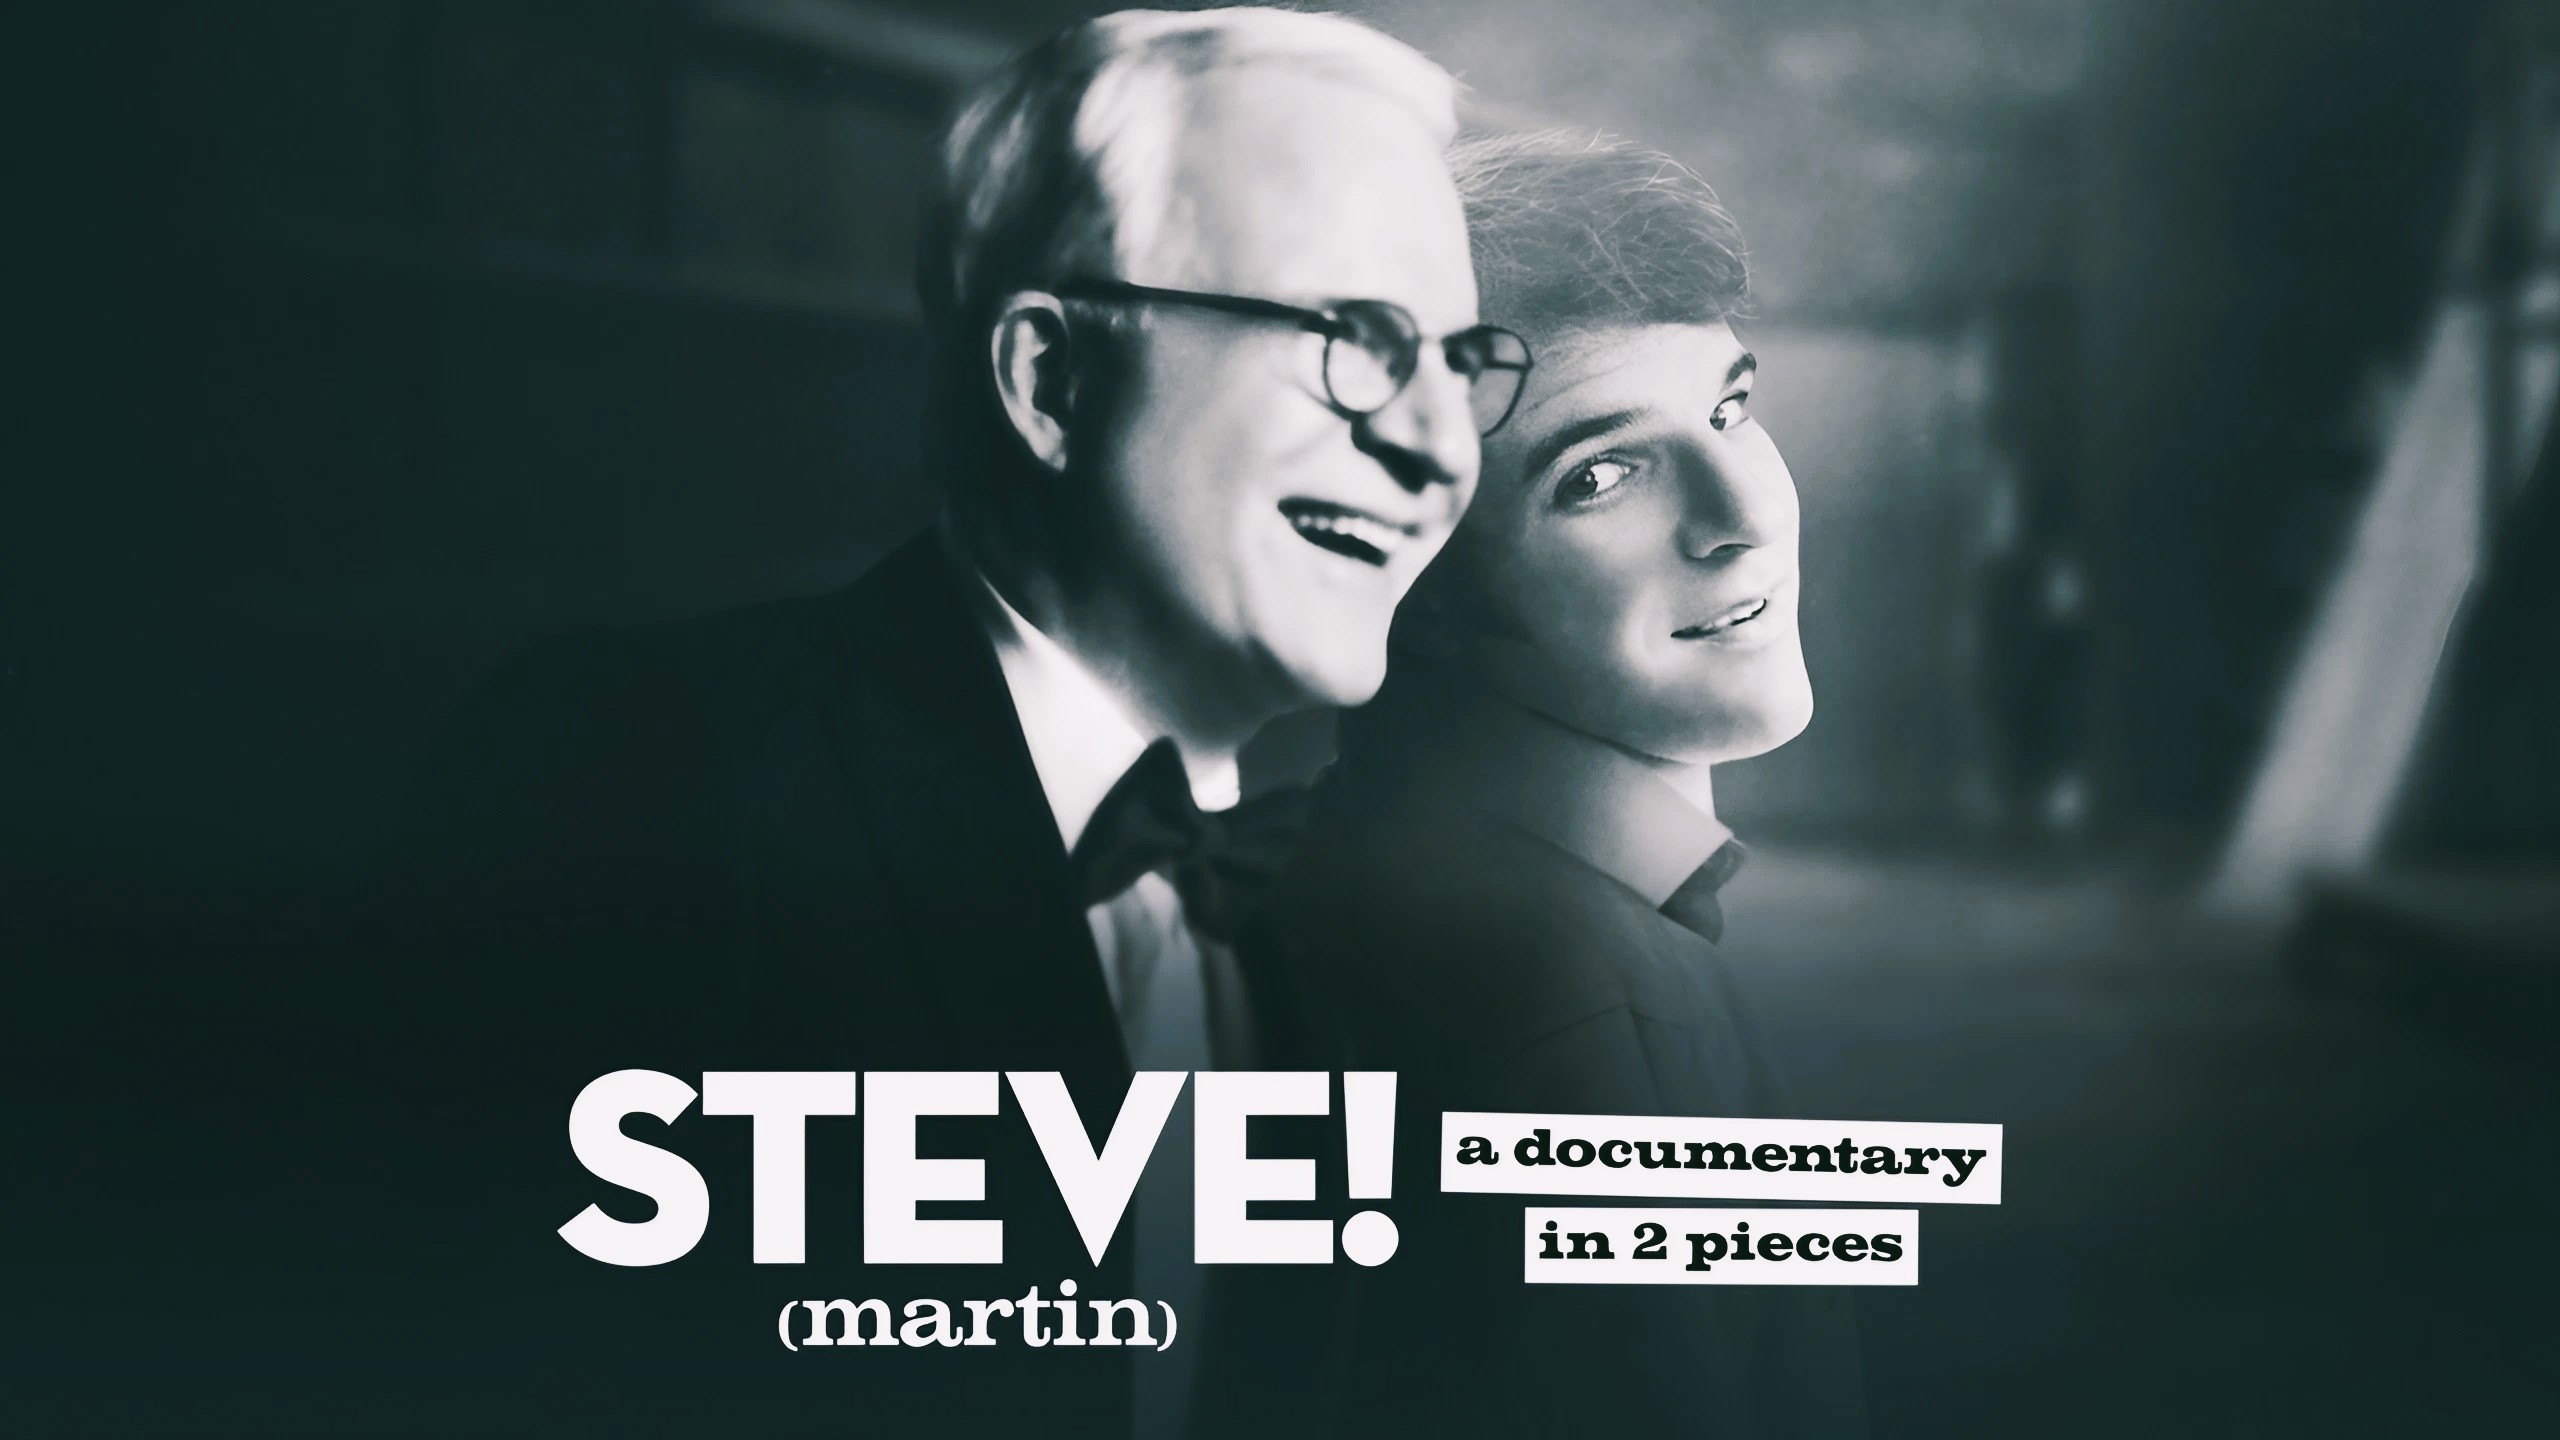 Is Steve! (Martin) A Documentary In 2 Pieces Based On A True Story?